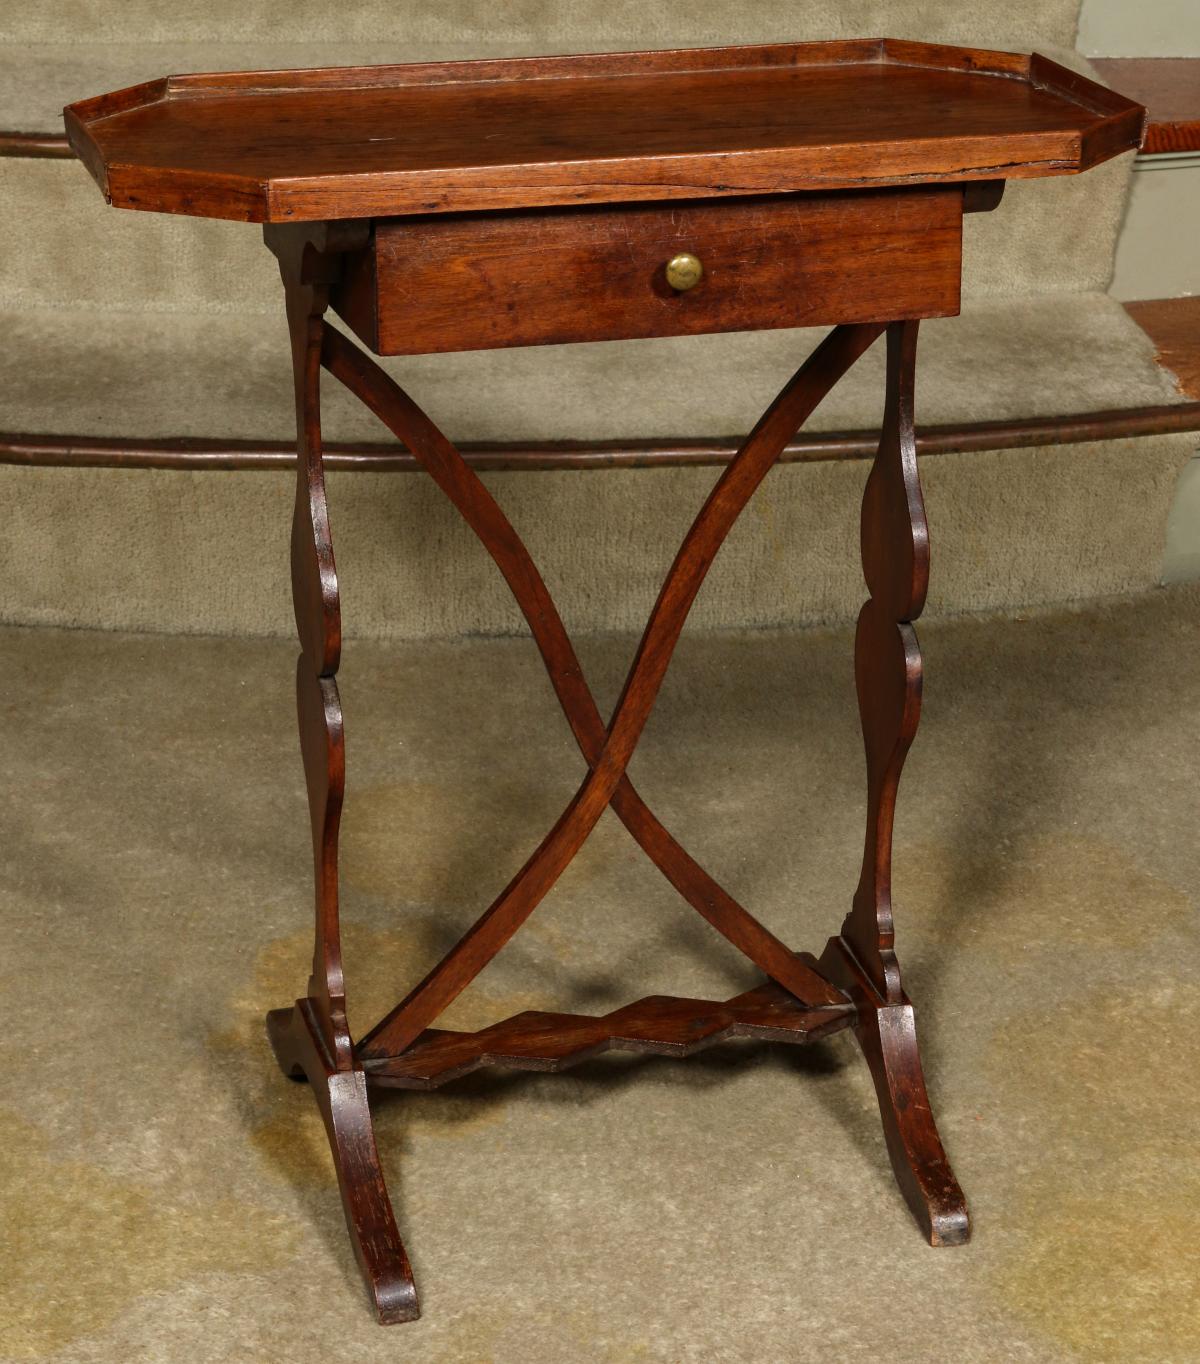 AN EARLY 19TH C. ITALIAN WALNUT STAND TABLE